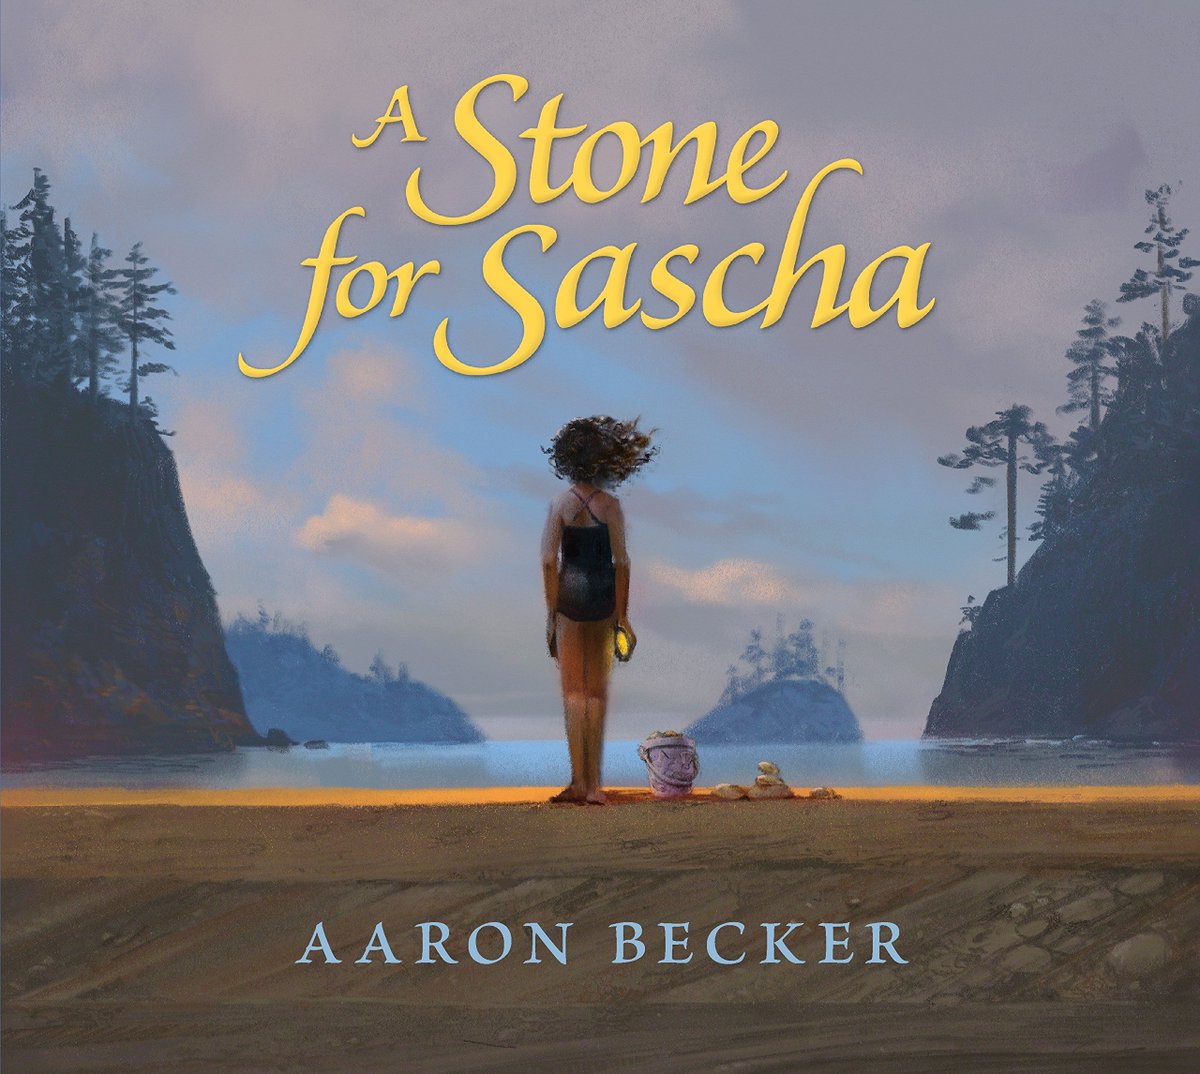 Handed over the reins of our  #PicturebookADay to one of the pupils today. She gave an inspiring, passionate and heart-warming telling of wordless book A Stone For Sascha by Aaron Becker, leaving the rest of the class absolutely stunned. It was special.  @storybreathing